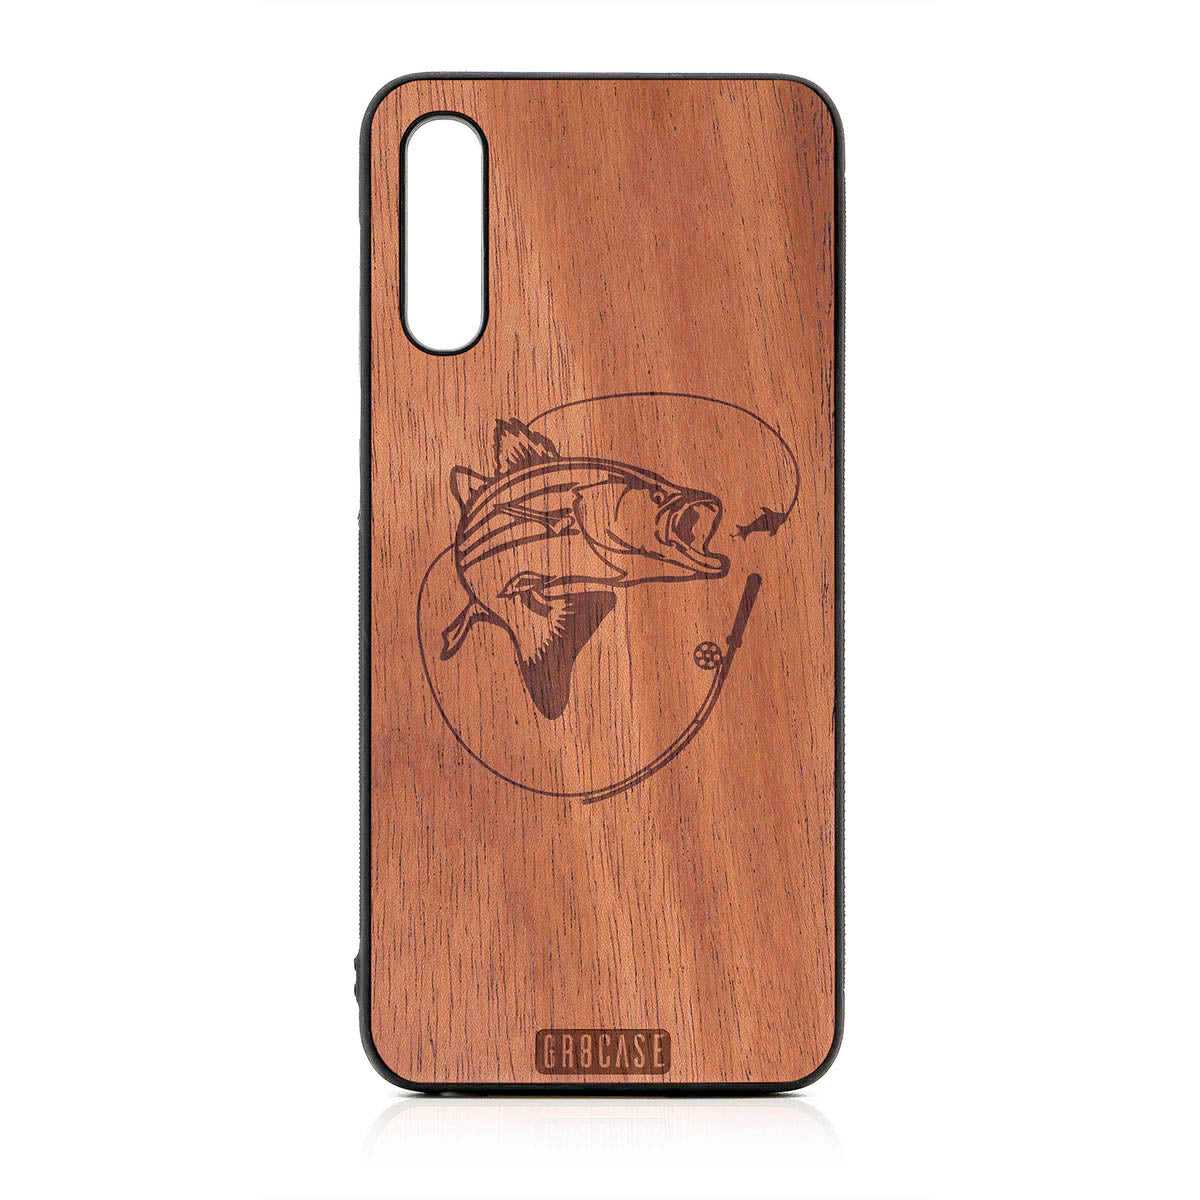 Fish and Reel Design Wood Case For Samsung Galaxy A50 by GR8CASE